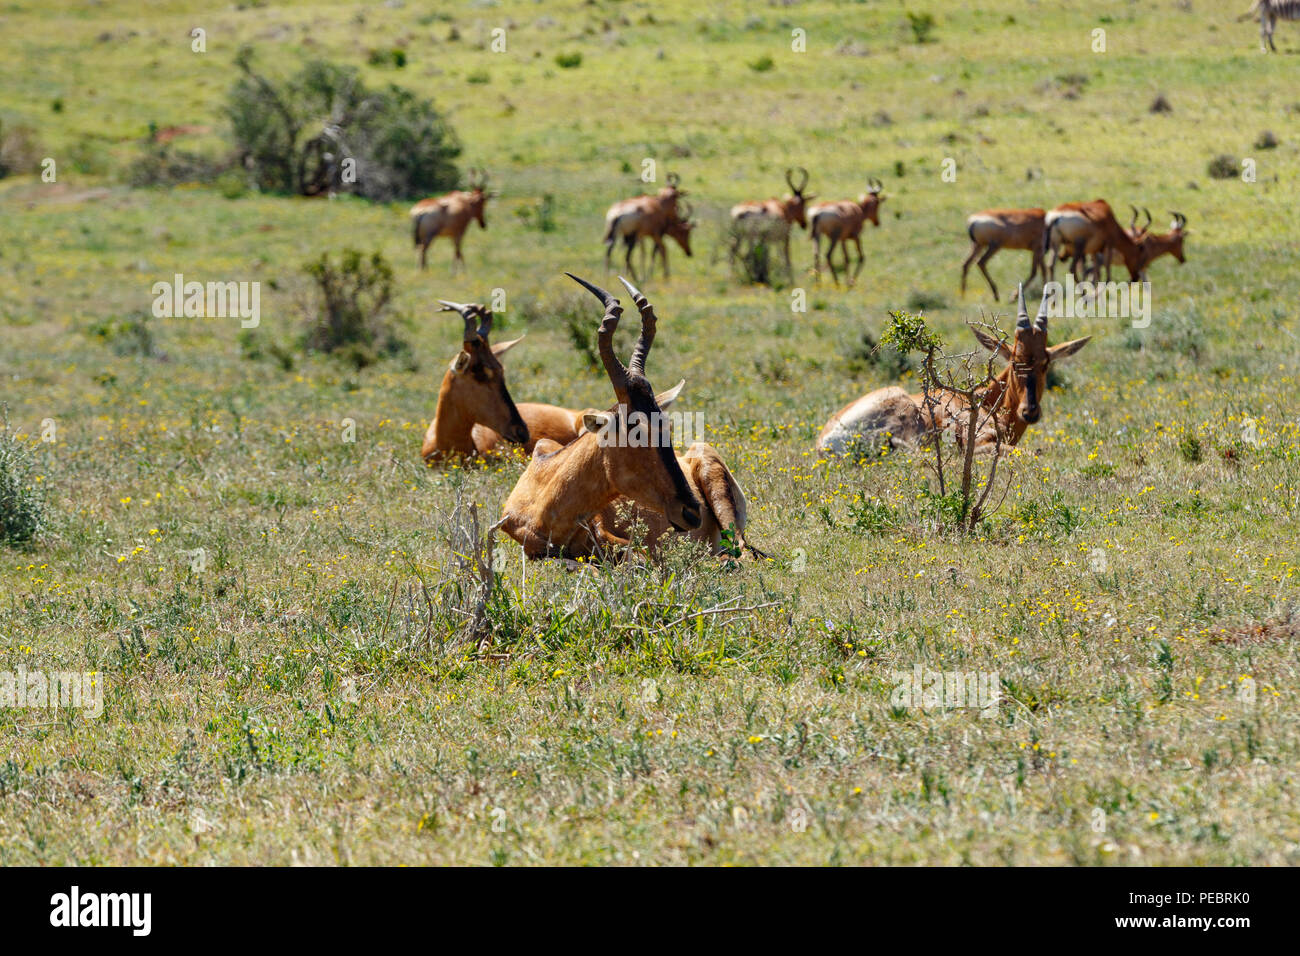 Herd of Red Hartebeest grazing in the grass in the field Stock Photo